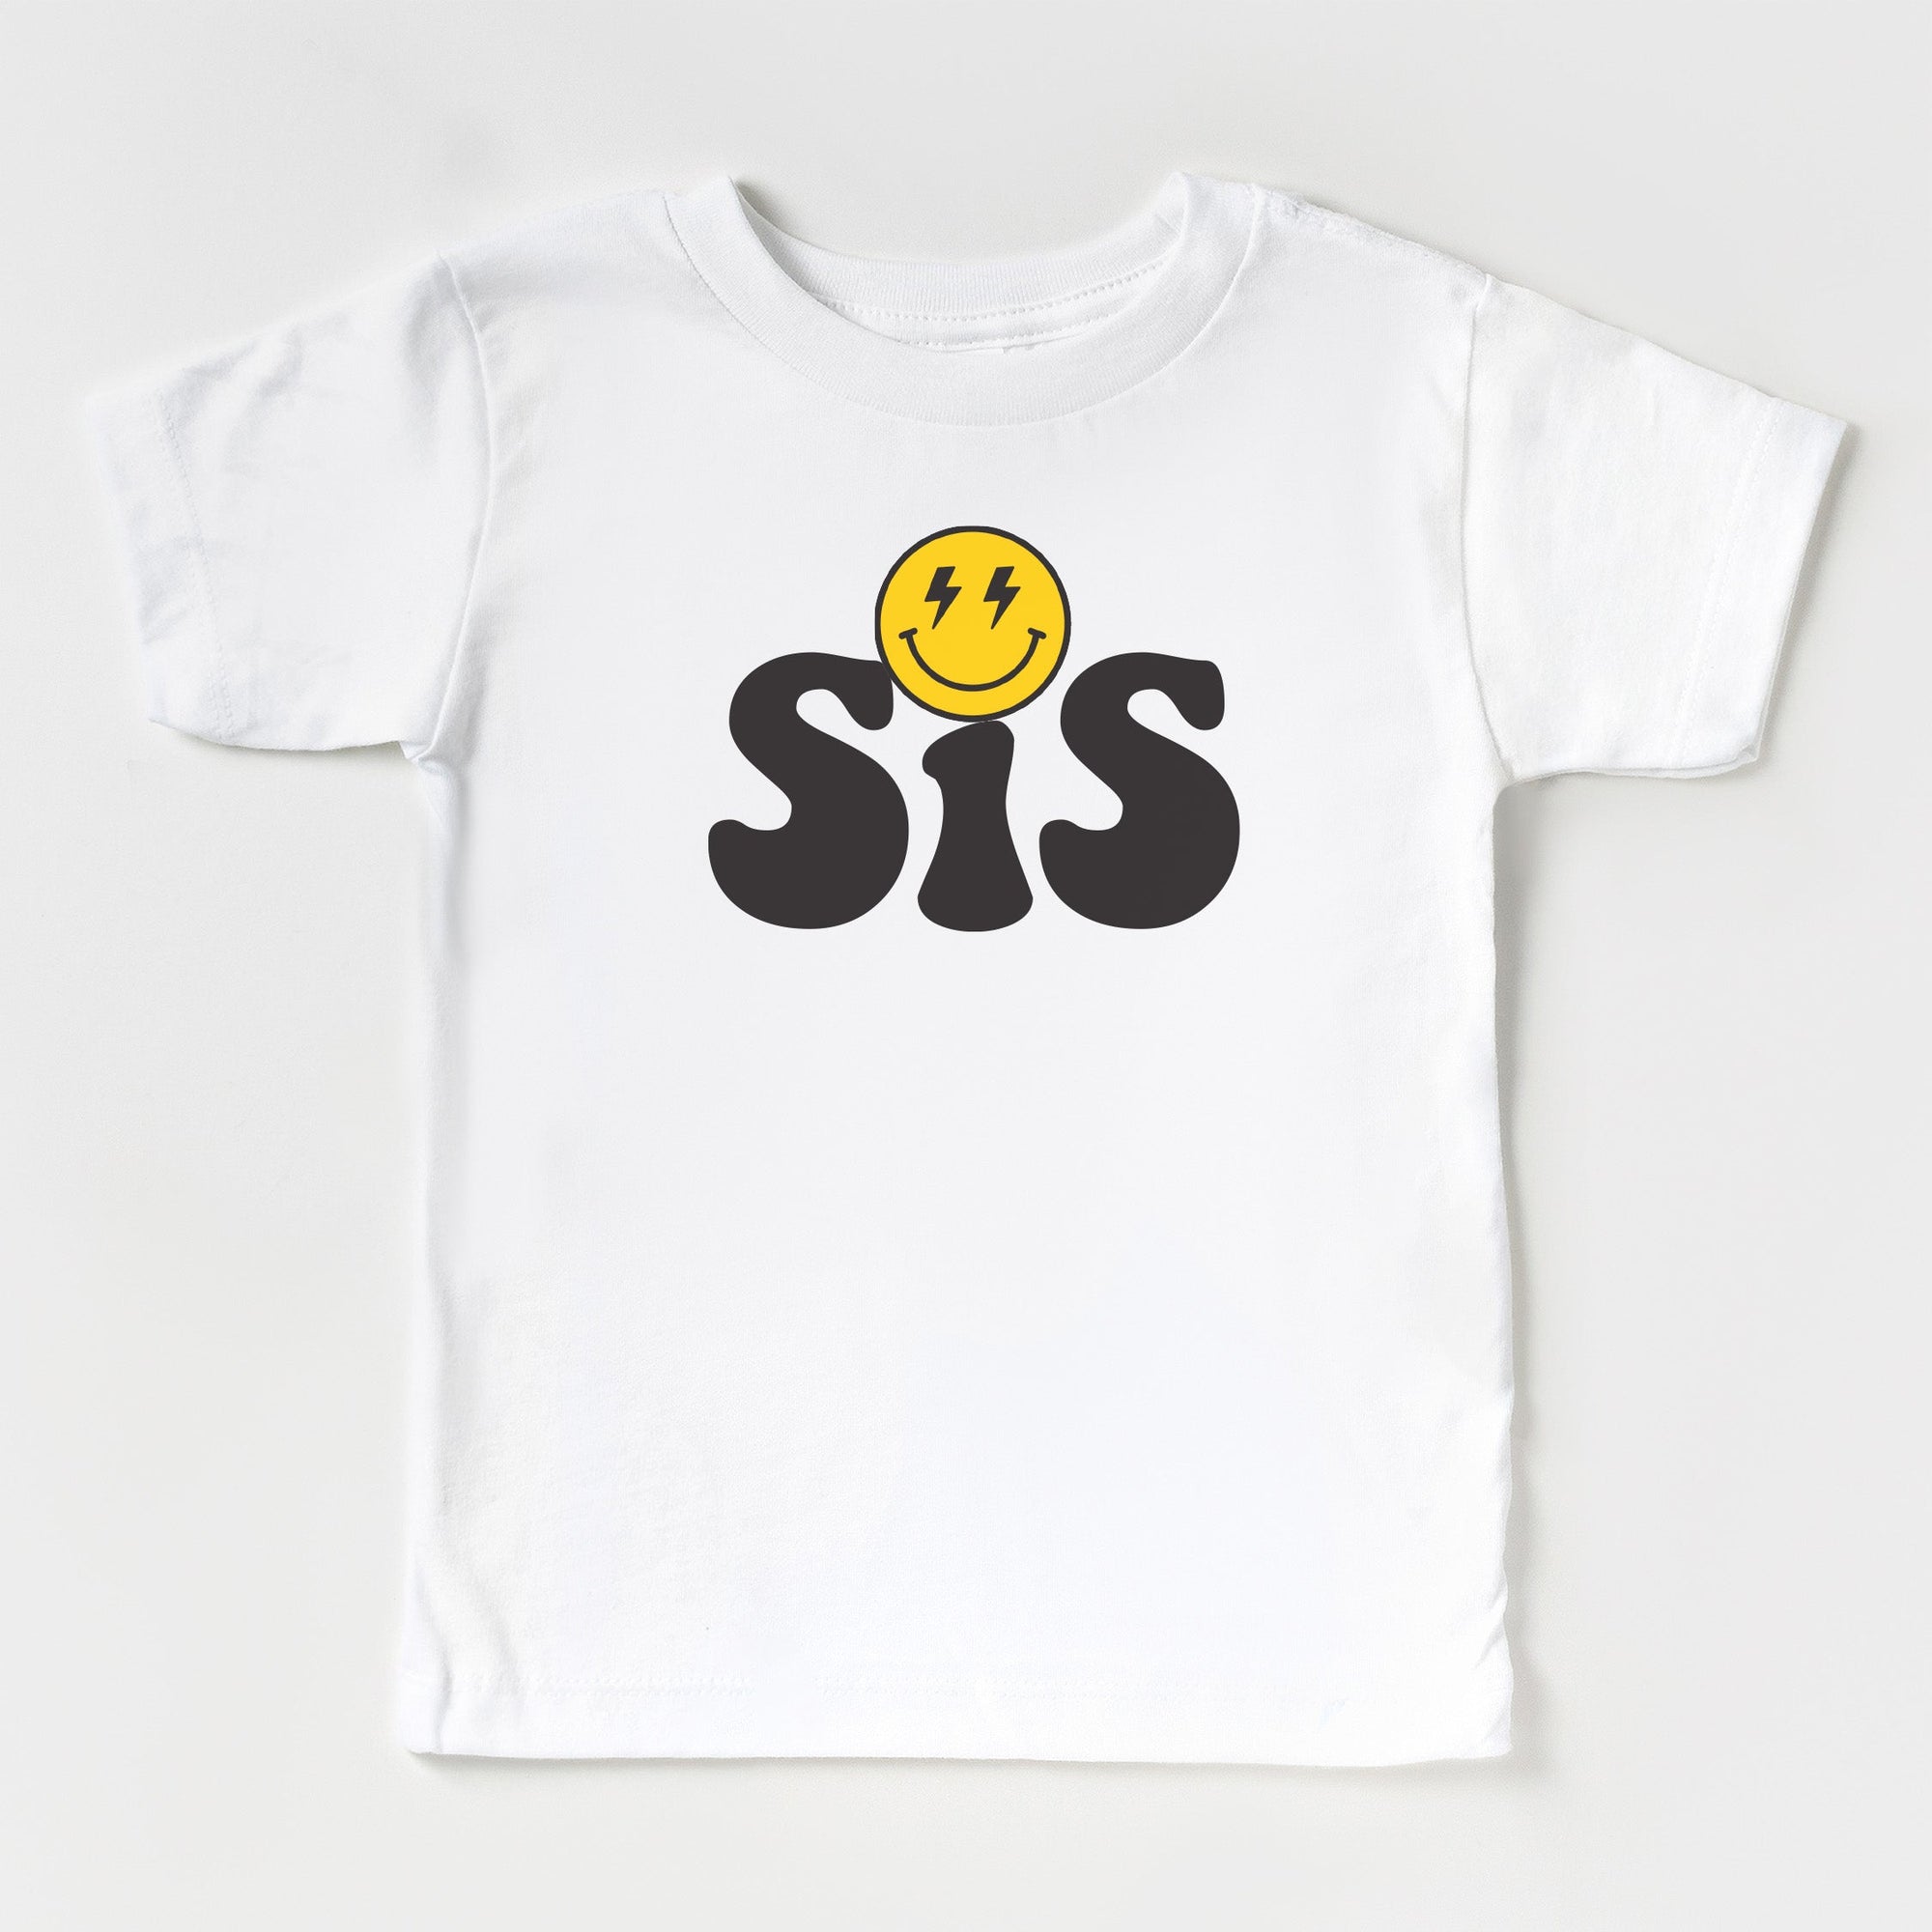 Cuddle Sleep Dream Baby & Toddler Tops Brother/Sister/Family Kid T-shirt | Happy Dude Theme